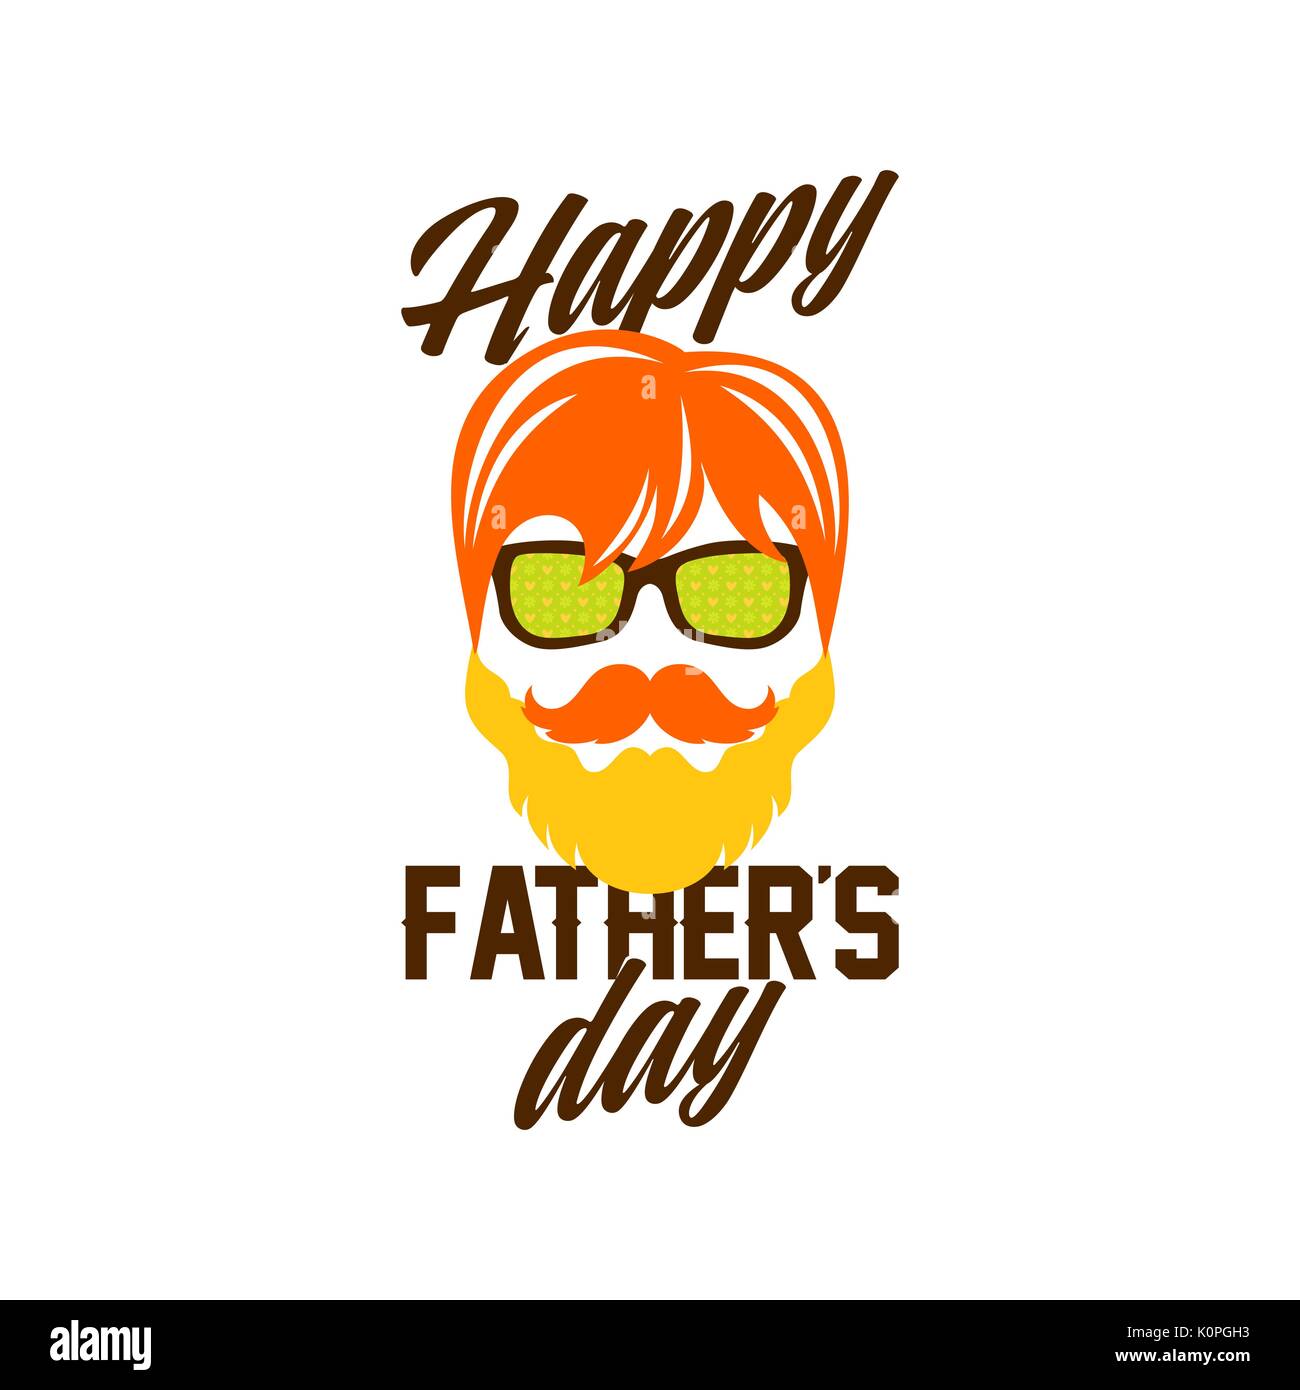 Typography and lettering with designer colored elements and silhouettes for a happy father's day Stock Vector